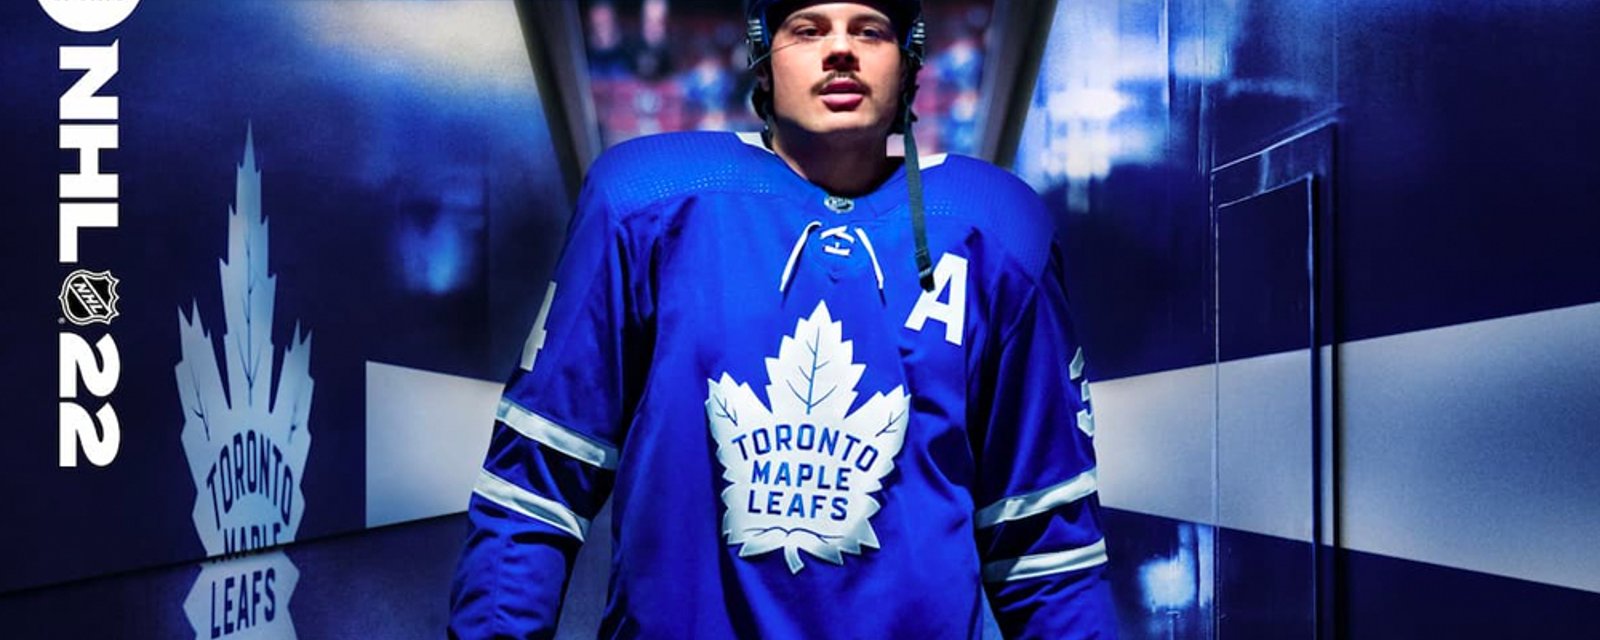 Leafs superstar Auston Matthews named cover athlete for NHL 22